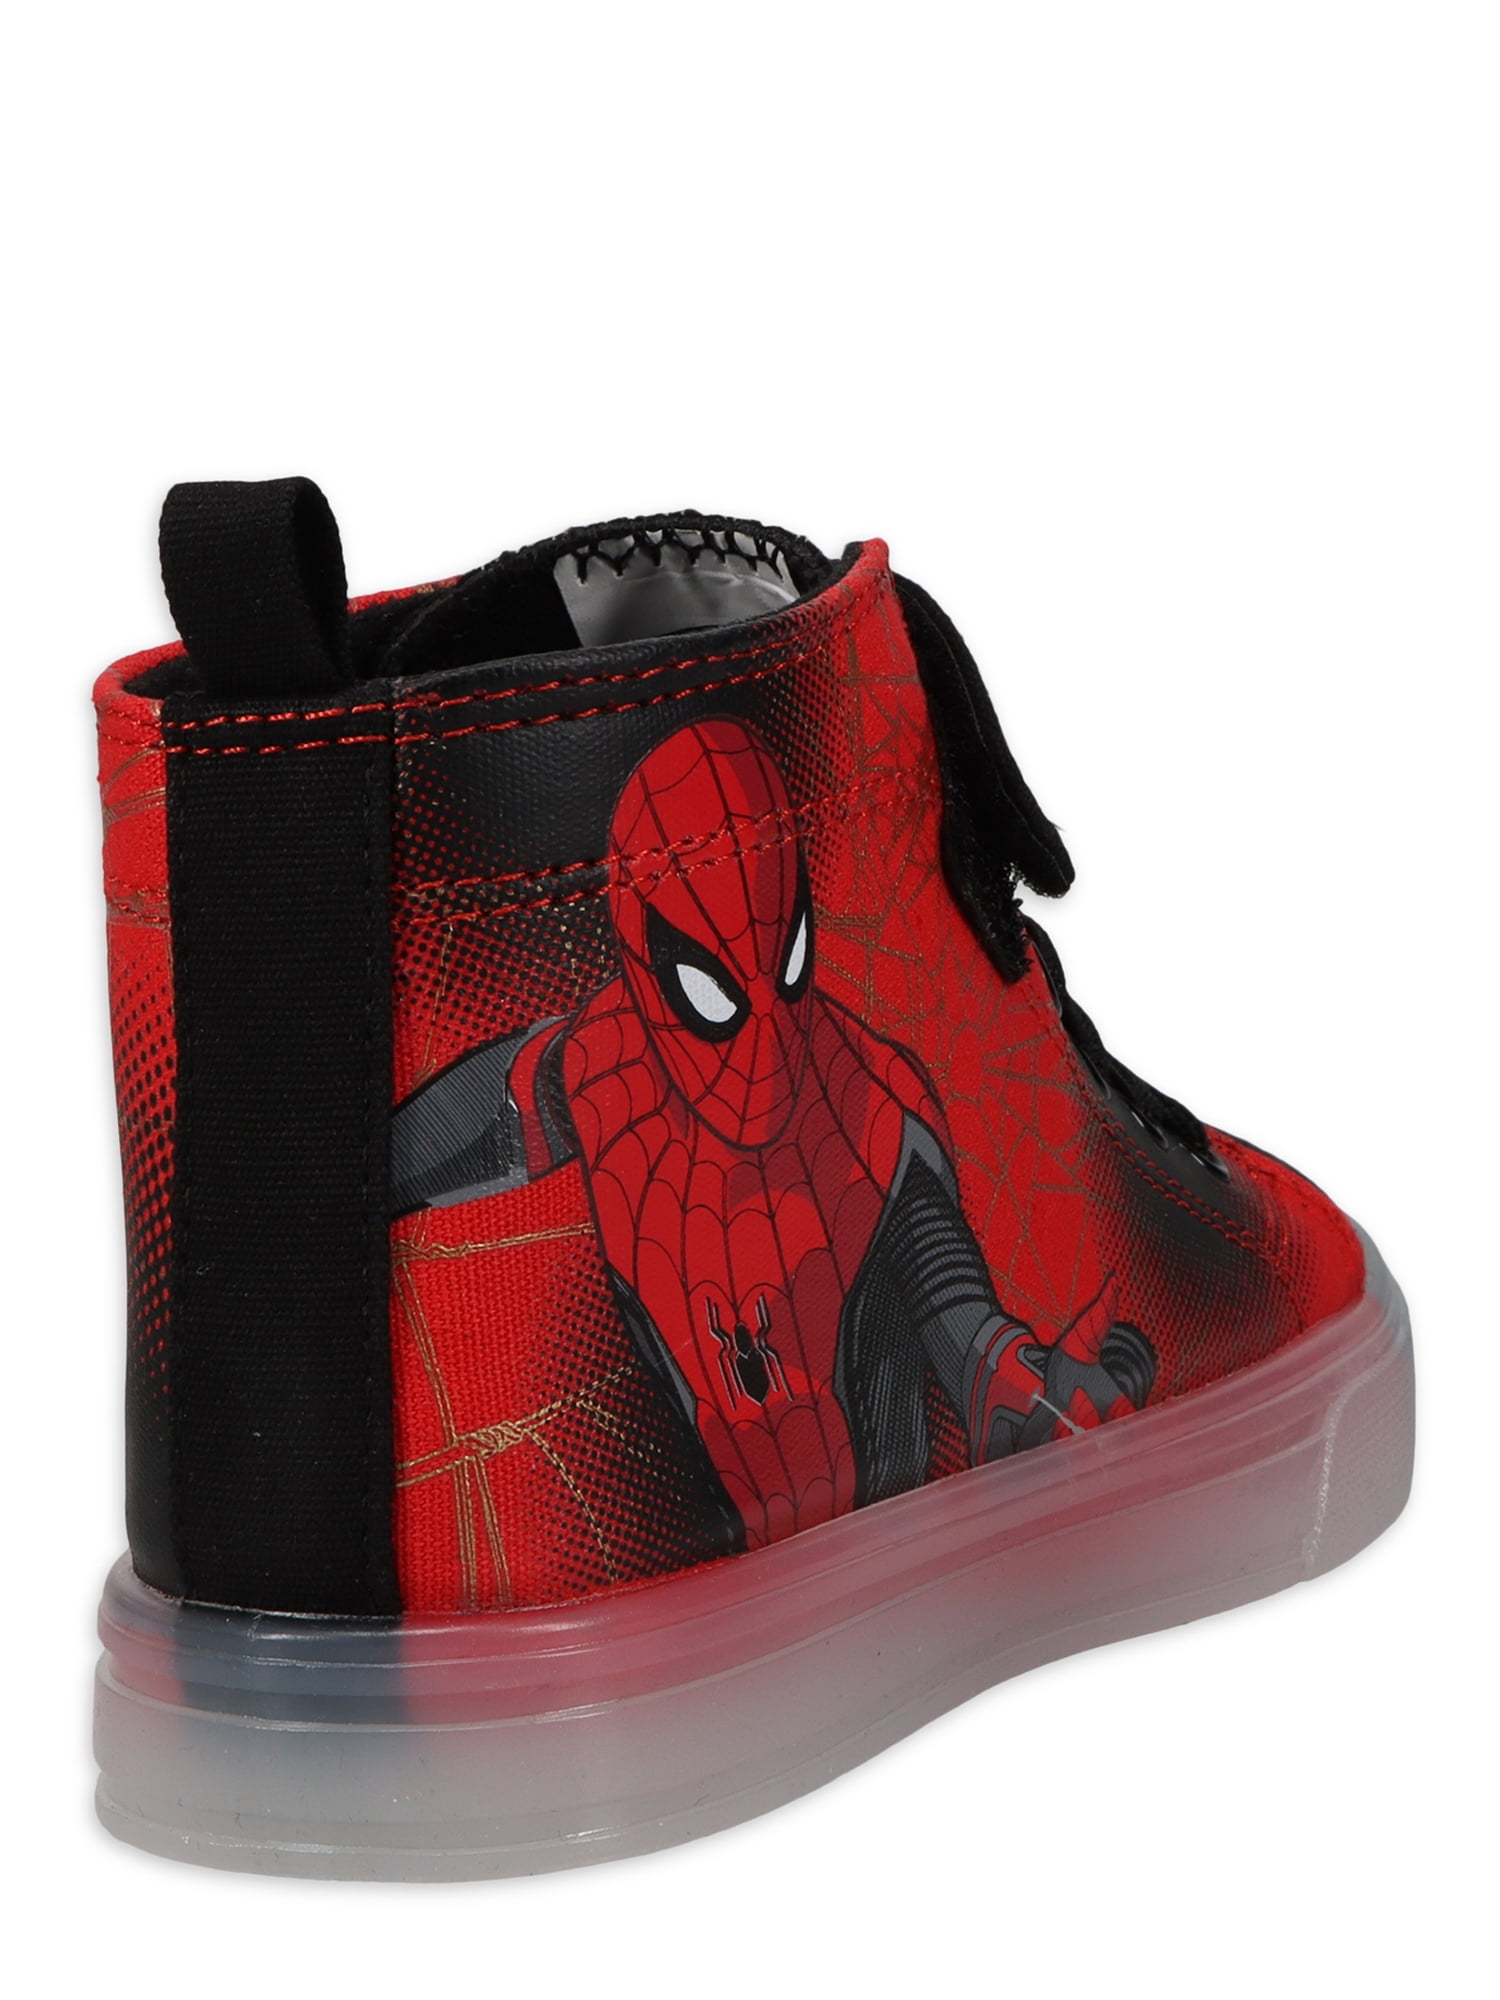 Toddler/Little Kid Favorite Characters Baby Boys Spider-Man Athletic SPF366 Lighted 